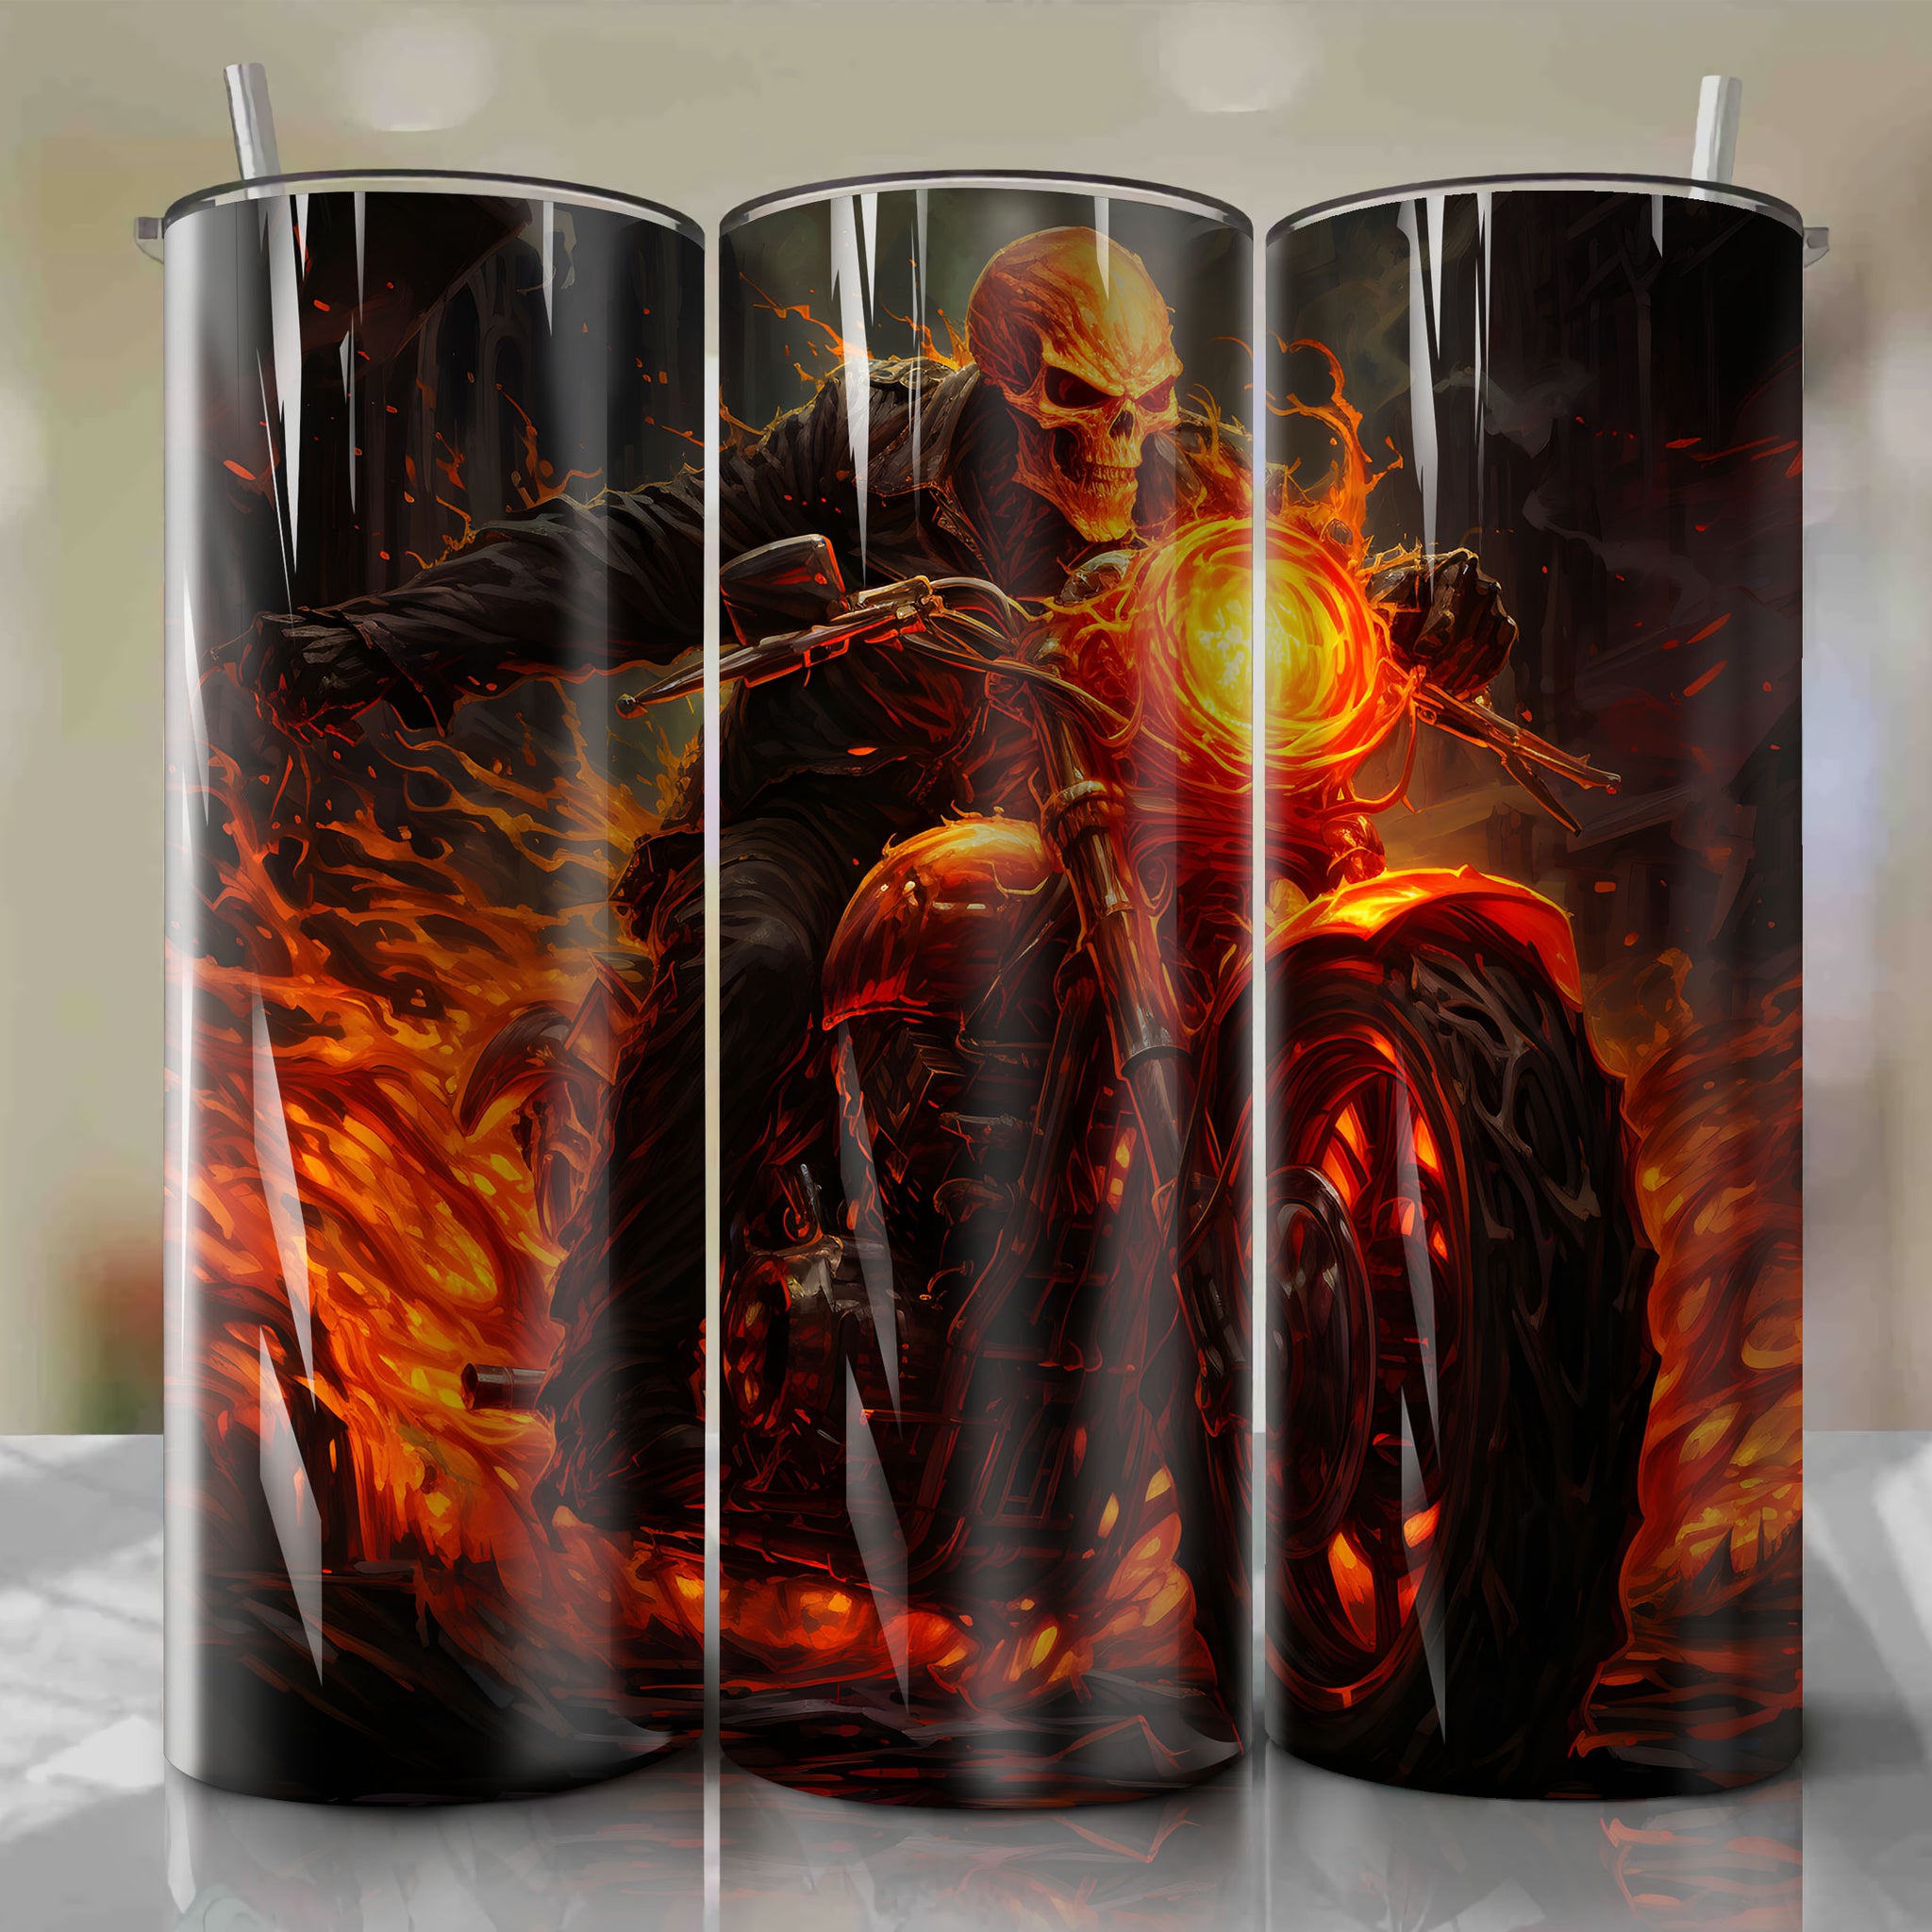 20 Oz Tumbler Wrap - Ghost Rider Flame Design for a Fiery and Stylish Look
